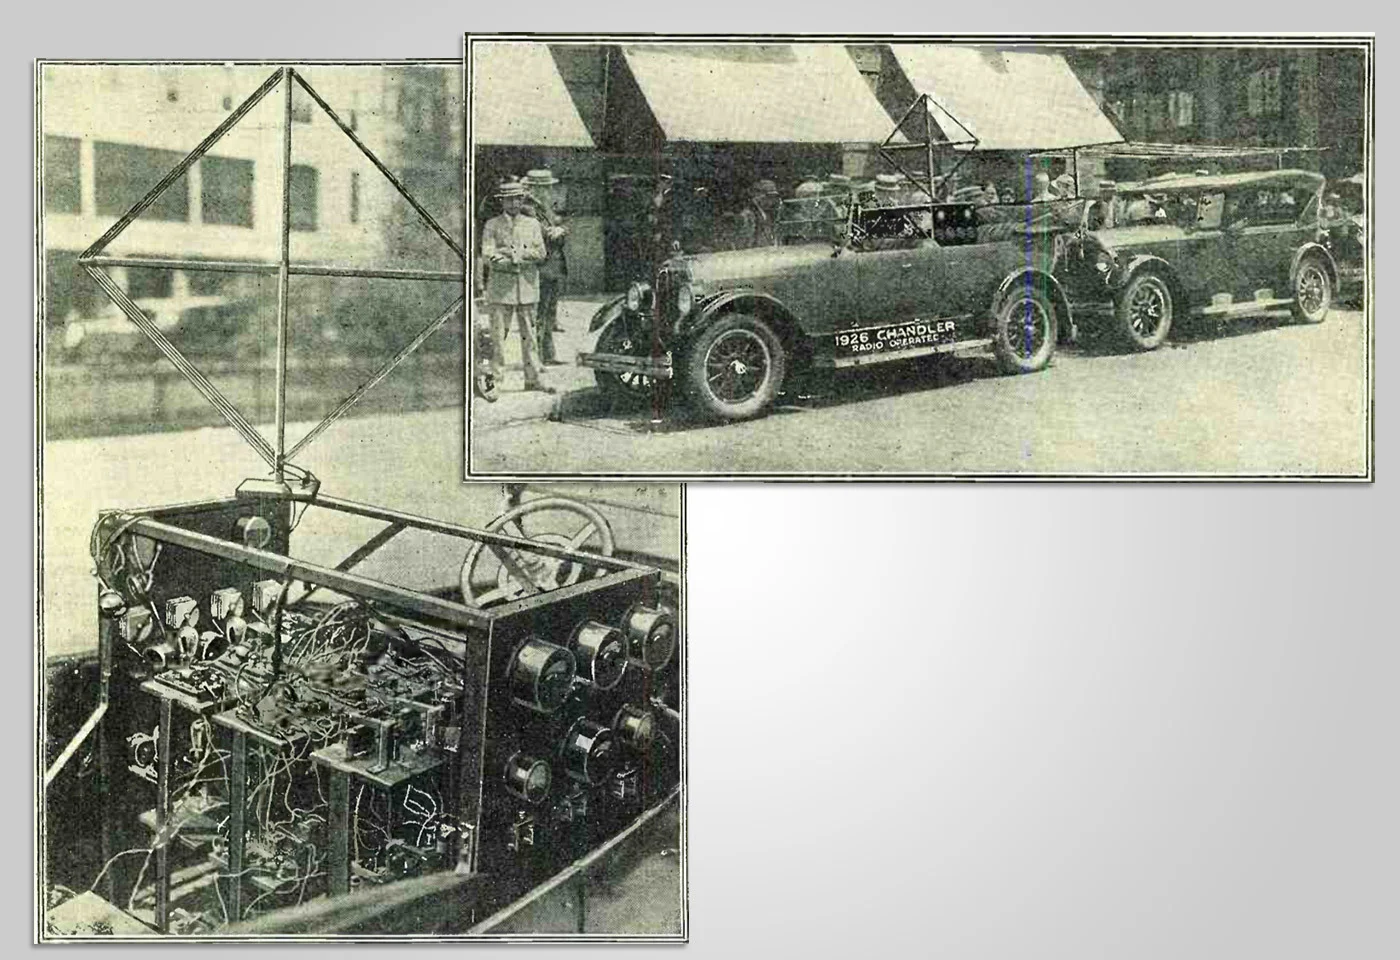 In August of 1925, Francis P. Houdina borrowed a trick from Nicola Tesla when he began touring the US to show off his radio-controlled automobile. The car was called the American Wonder and its demo in NYC was a bumpy one. The 